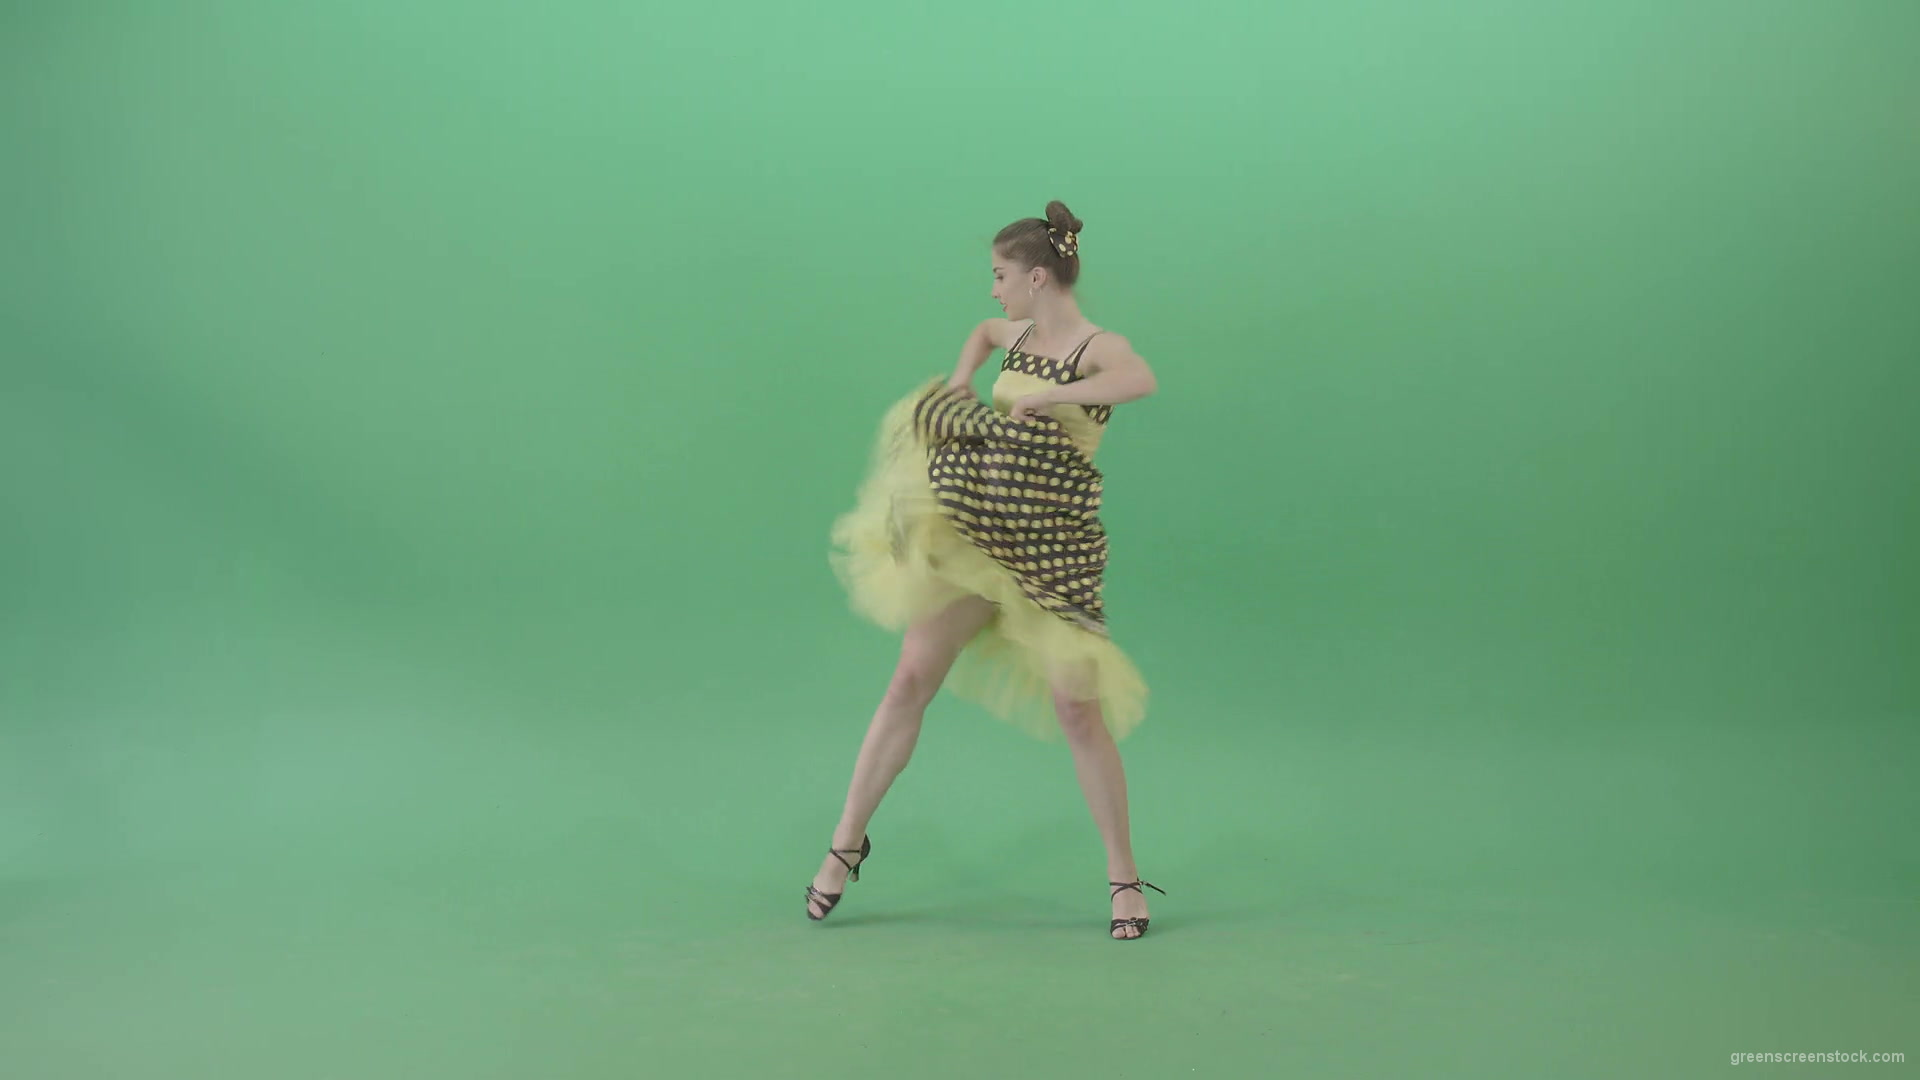 Happy-Woman-dancing-Rock-and-Roll-Jazz-Swing-Boogie-woogie-isolated-on-Green-Screen-4K-Video-Footage-1920_002 Green Screen Stock